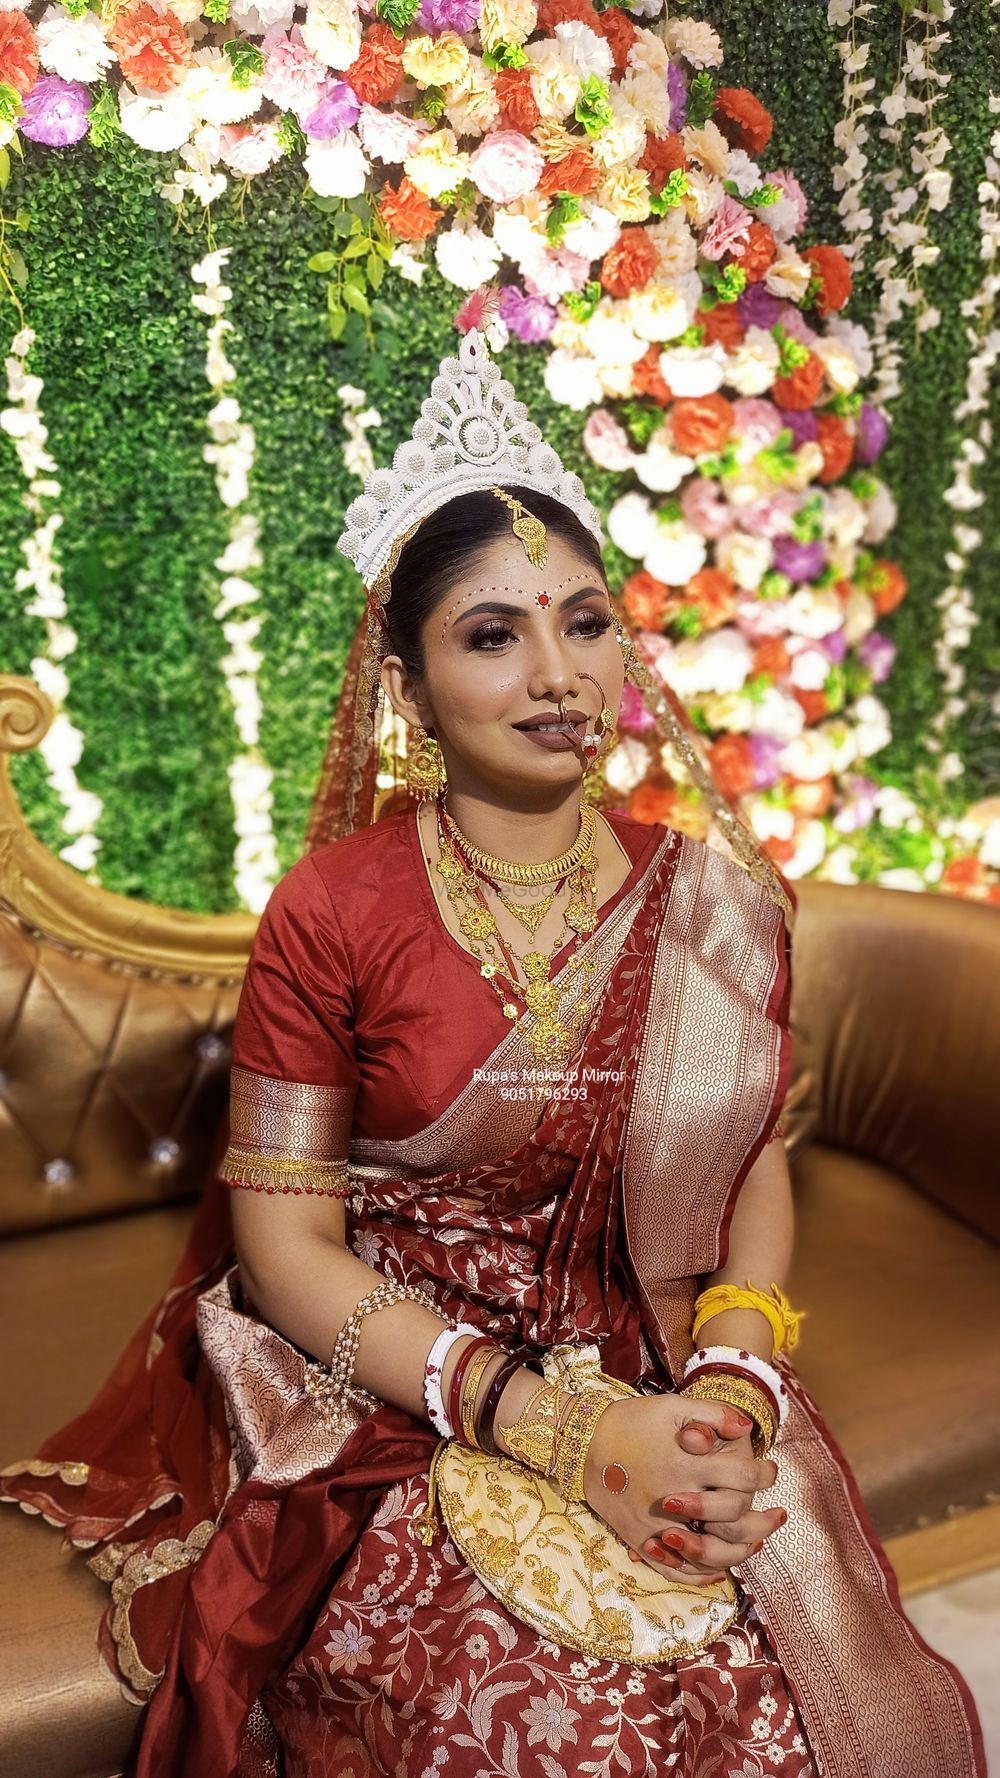 Photo From Bridal Makeover? - By Rupa's Makeup Mirror